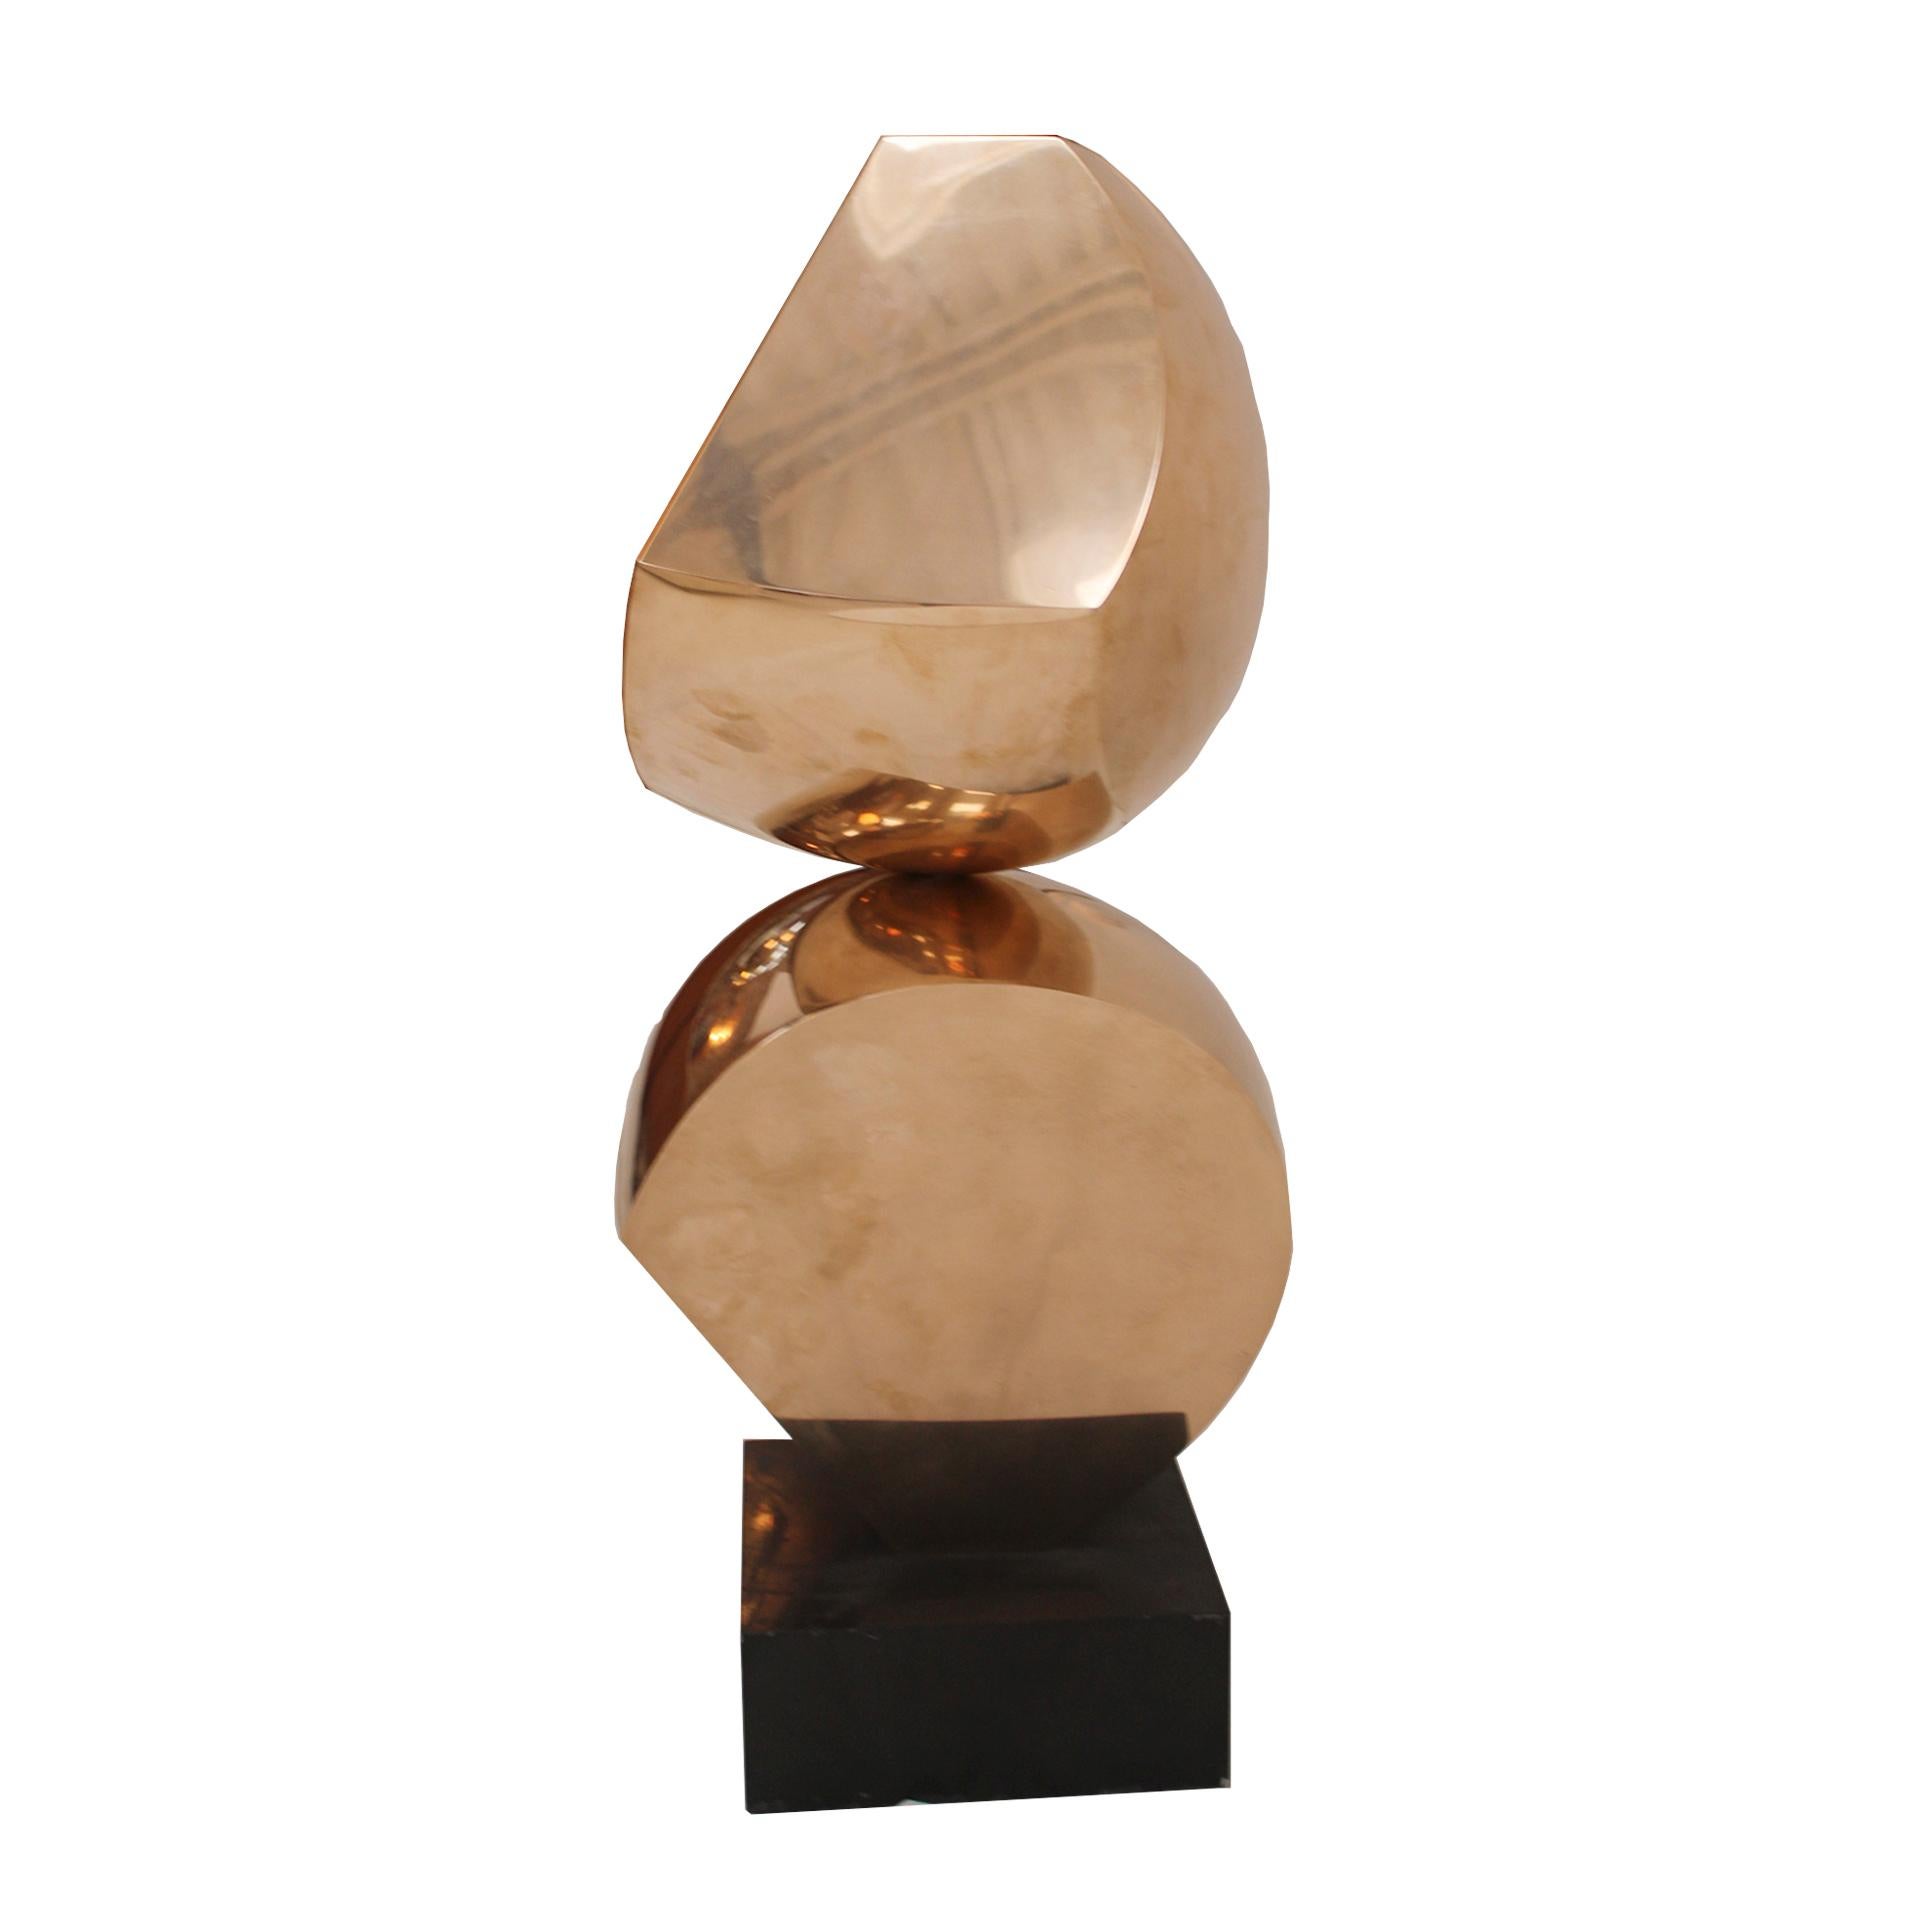 Neuclosis by Antonio Grediaga Kieff, signed and numbered 2/6

This extraordinary work of art is expertly crafted in bronze and features a unique abstract form. The sculpture stands on a black marble base, creating a captivating contrast between the